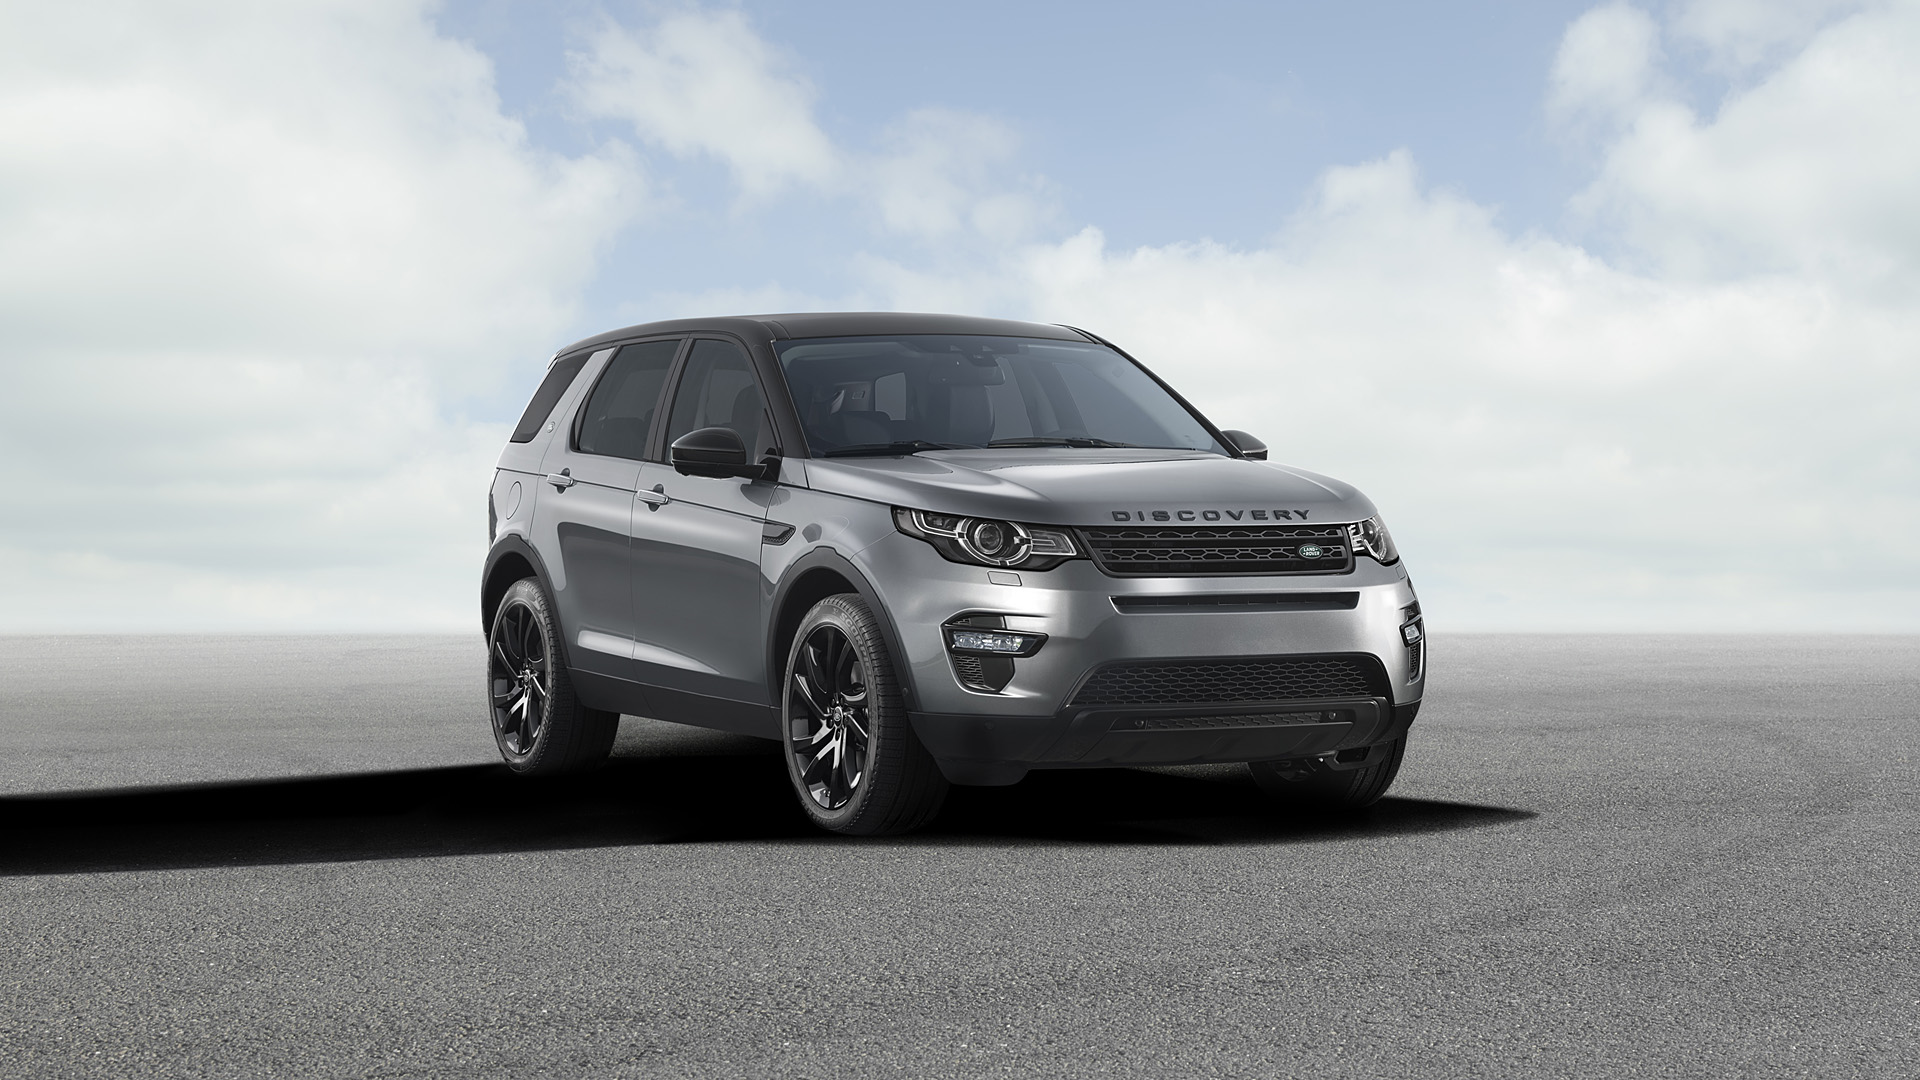  2015 Land Rover Discovery Sport Wallpaper.